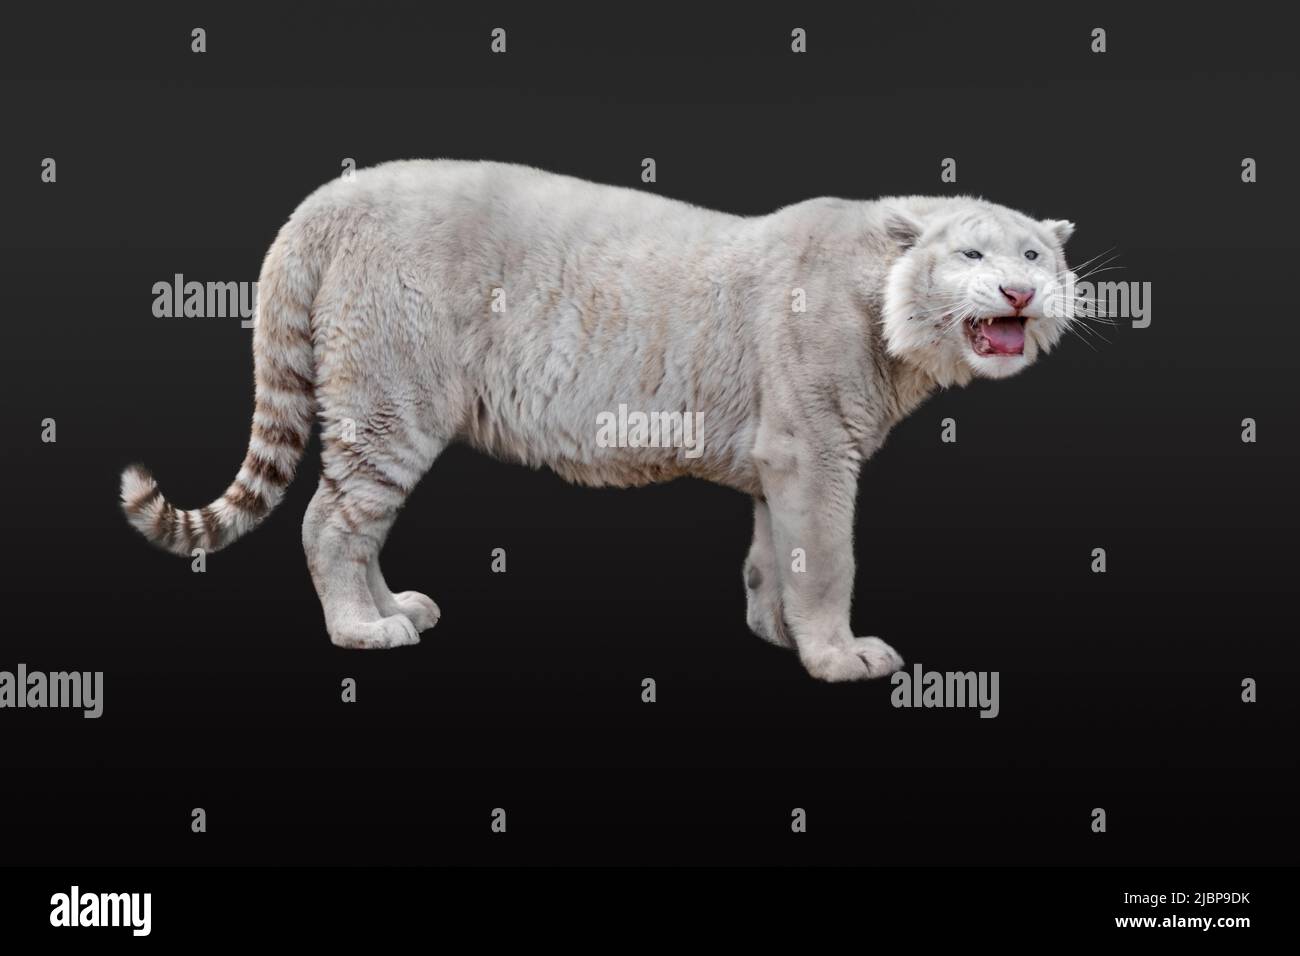 White young tiger (Panthera tigris) with pink nose and long whiskers,  standing. Isolated on black background. Wild animals, big cat Stock Photo -  Alamy